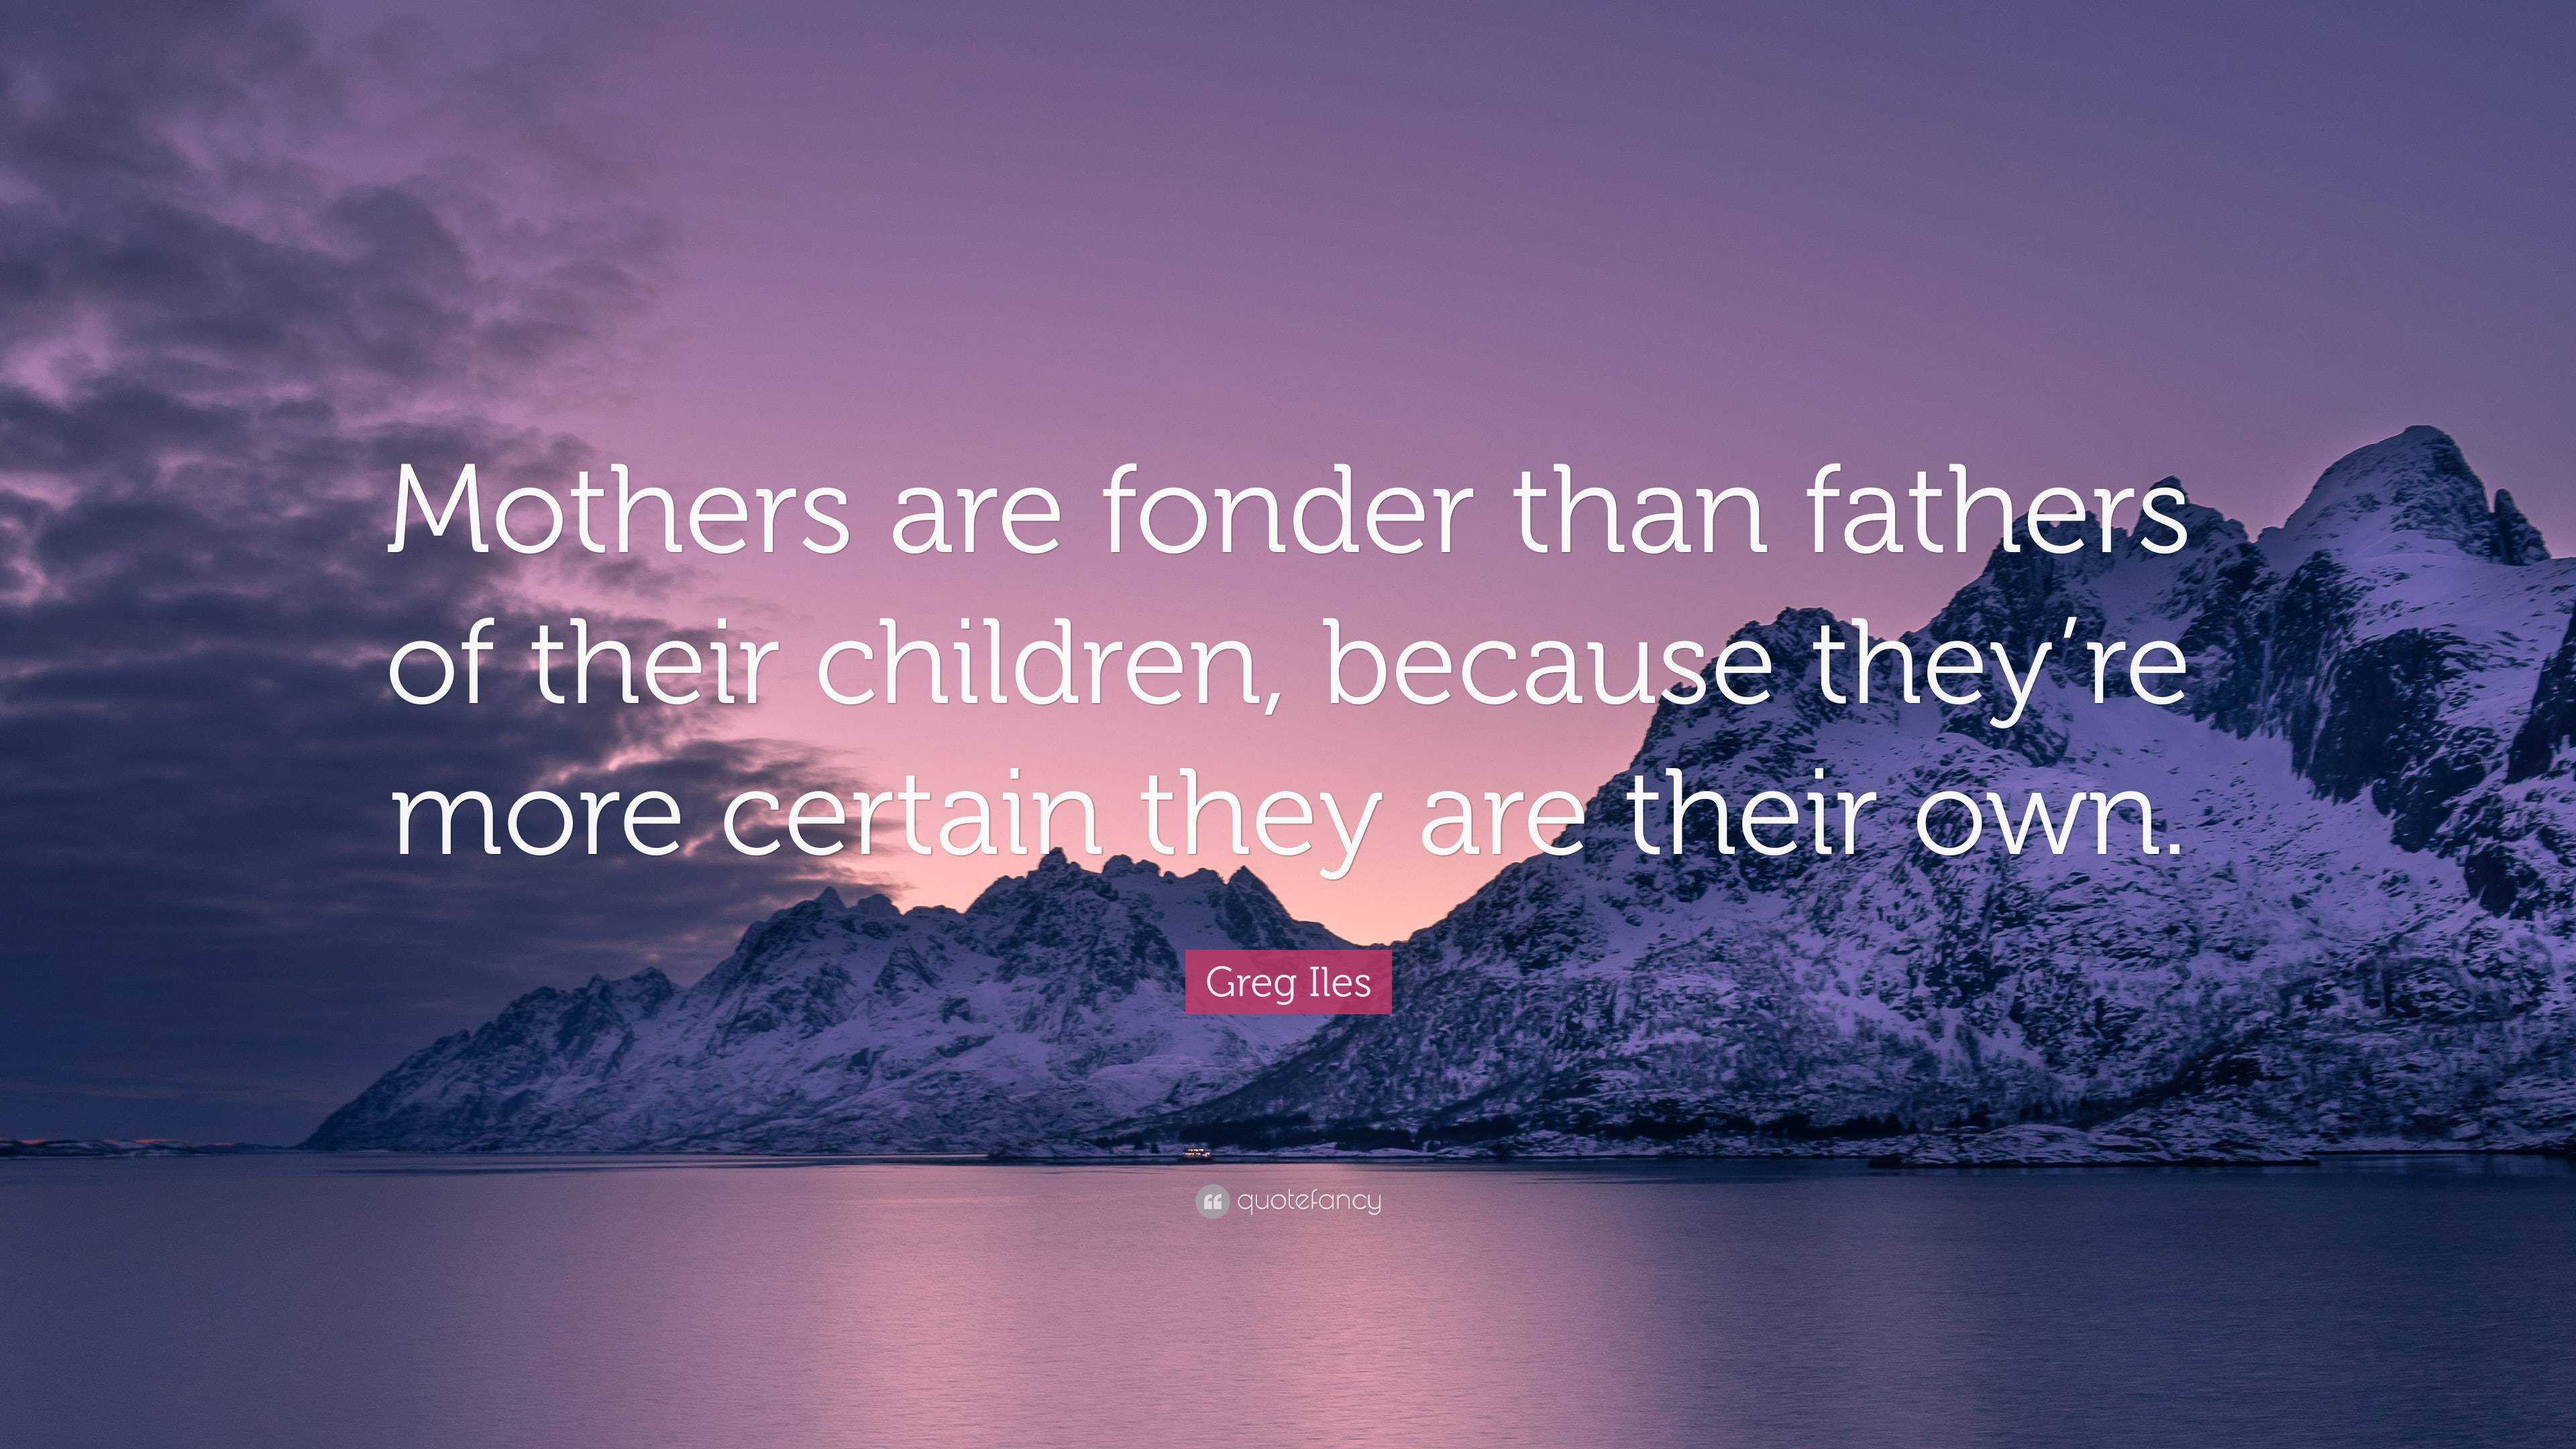 Greg Iles Quote: “Mothers are fonder than fathers of their children ...